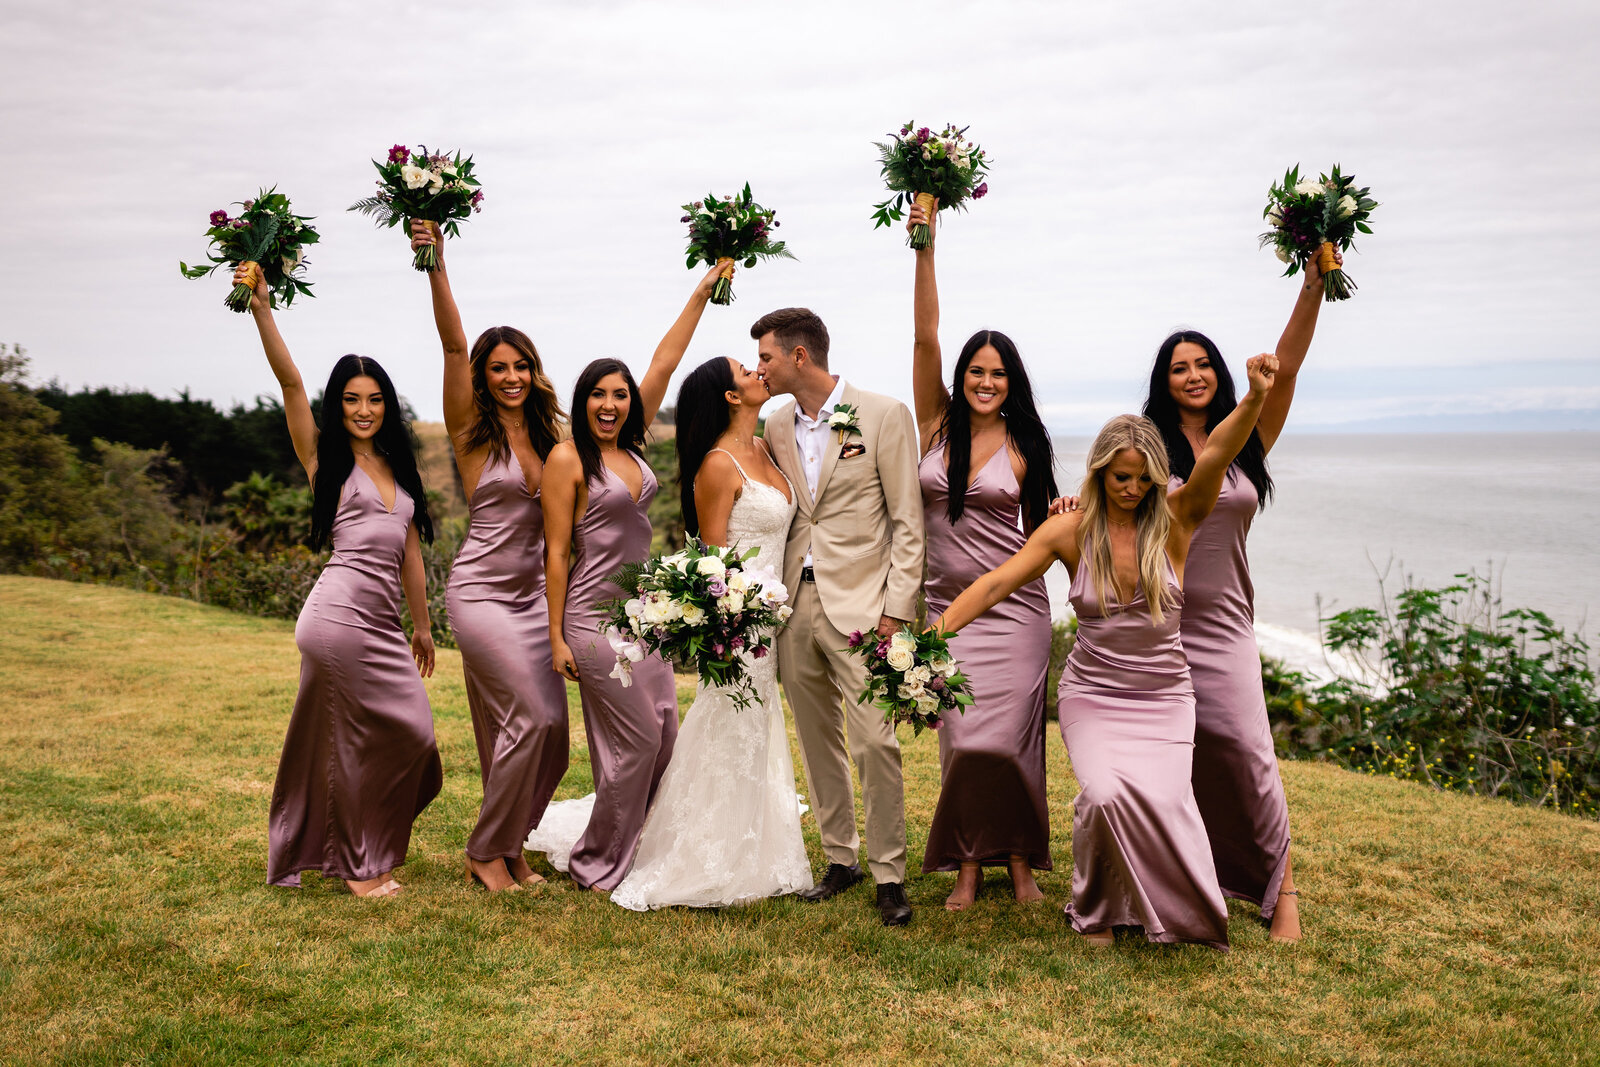 Wedding couple kissing with bridal party around them throwing their arms around being really excited.